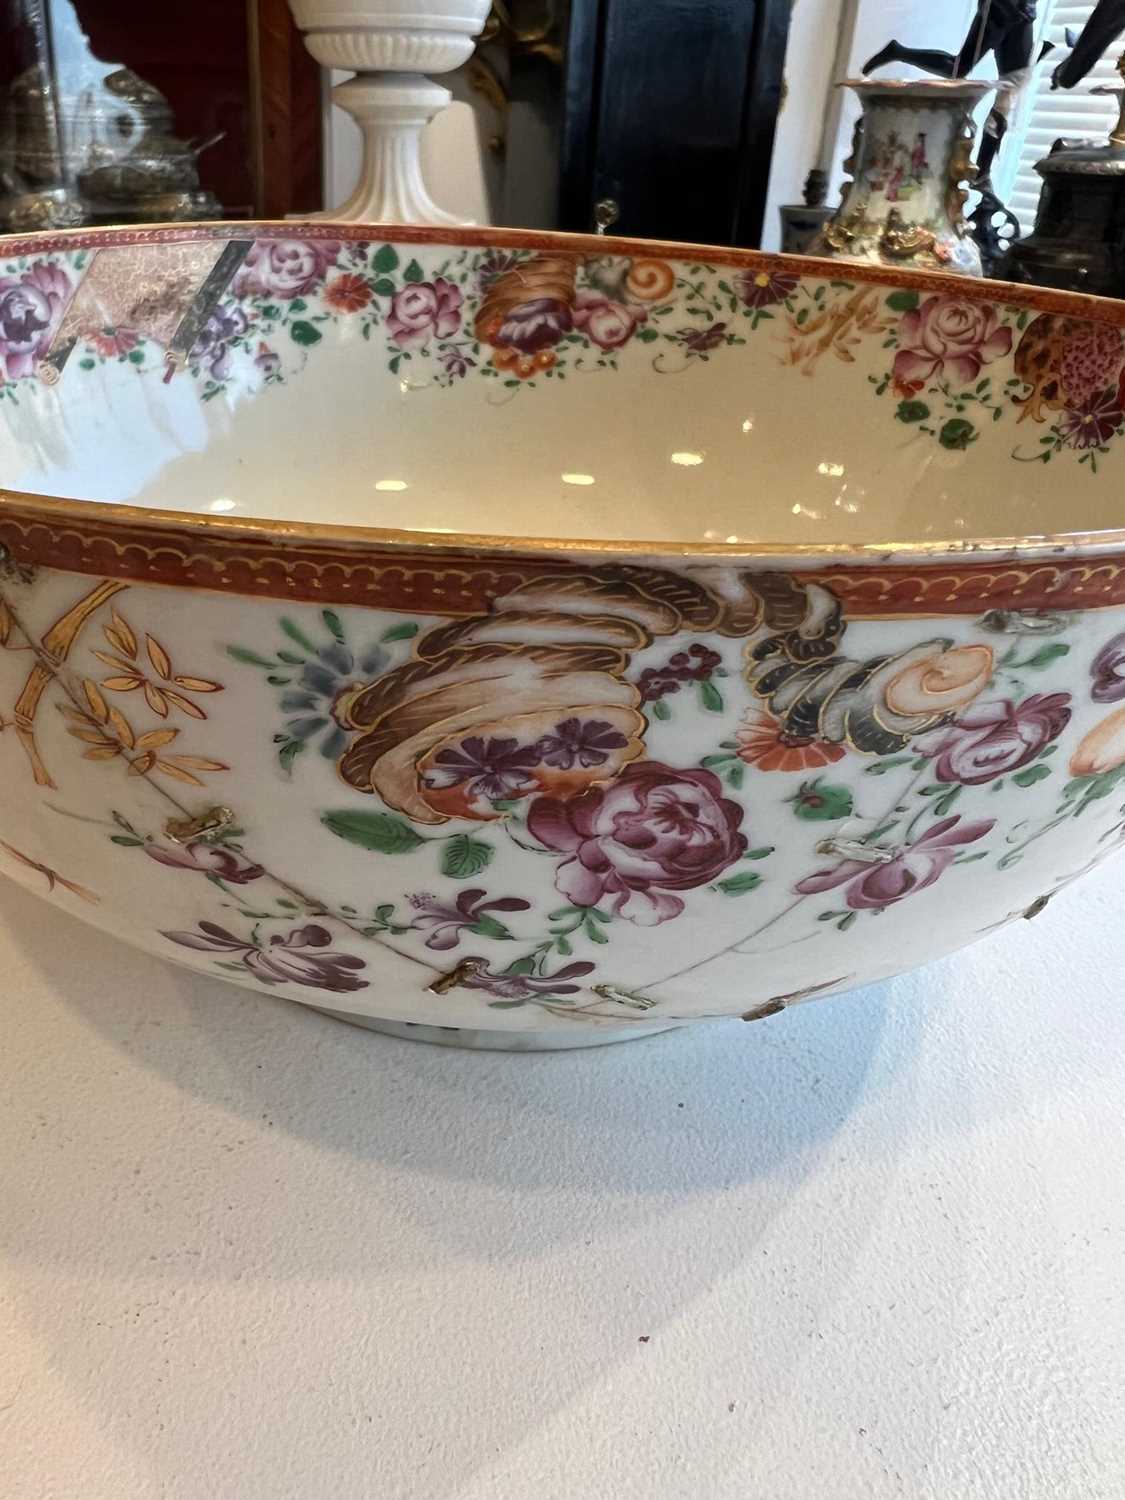 AN EARLY 19TH CENTURY CHINESE PORCELAIN BOWL - Image 11 of 11